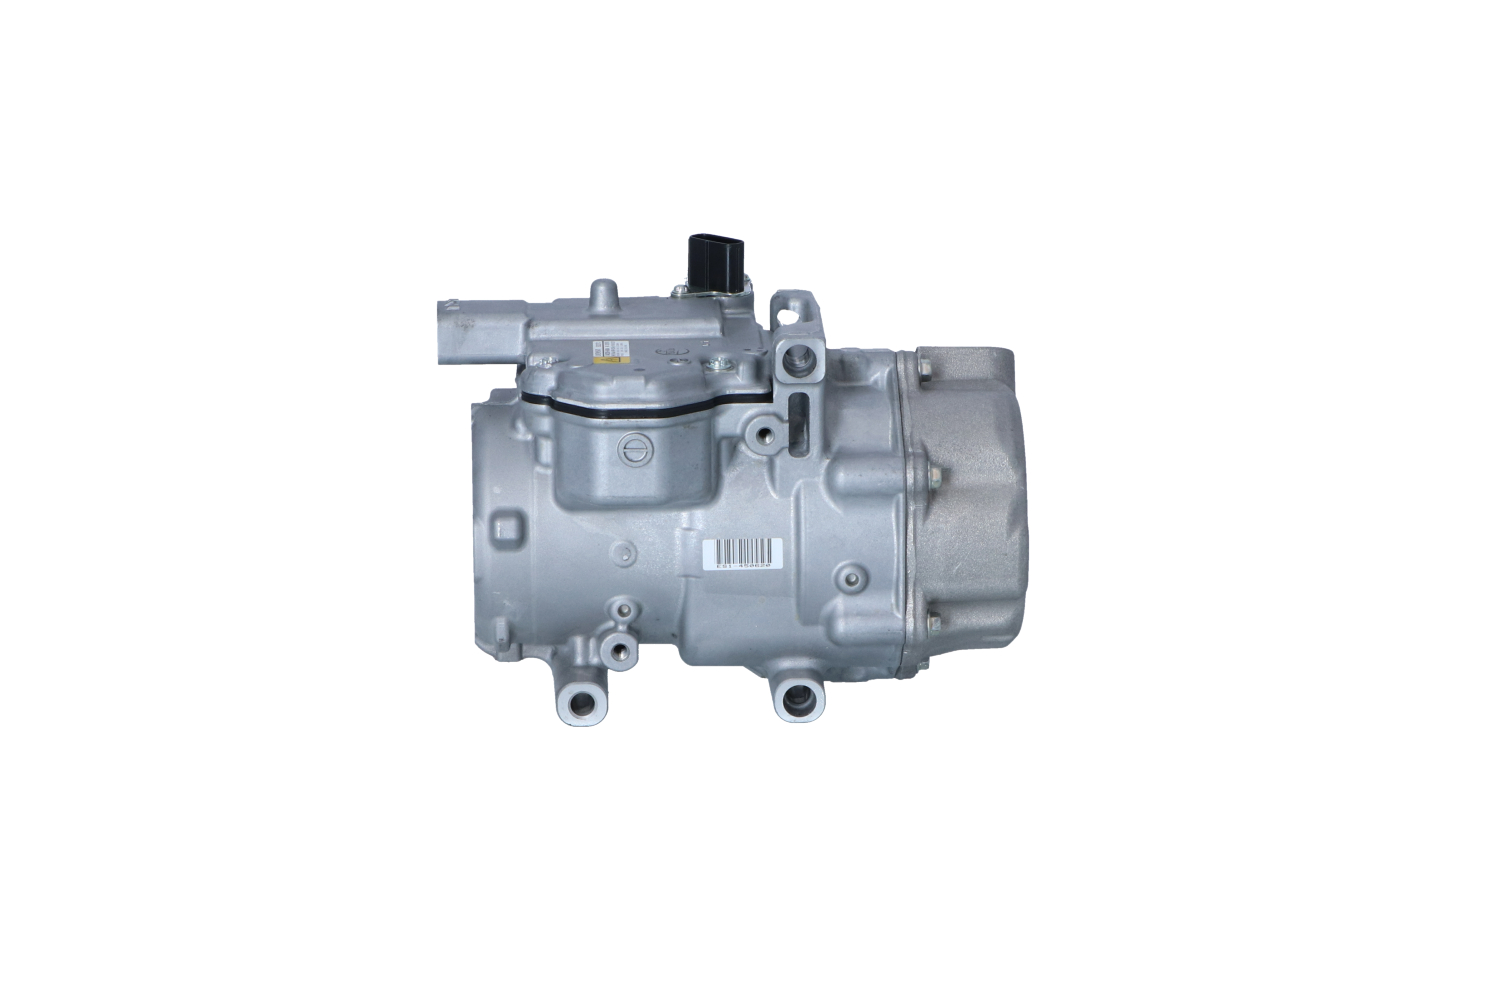 Lexus Air conditioning compressor NRF 320062G at a good price